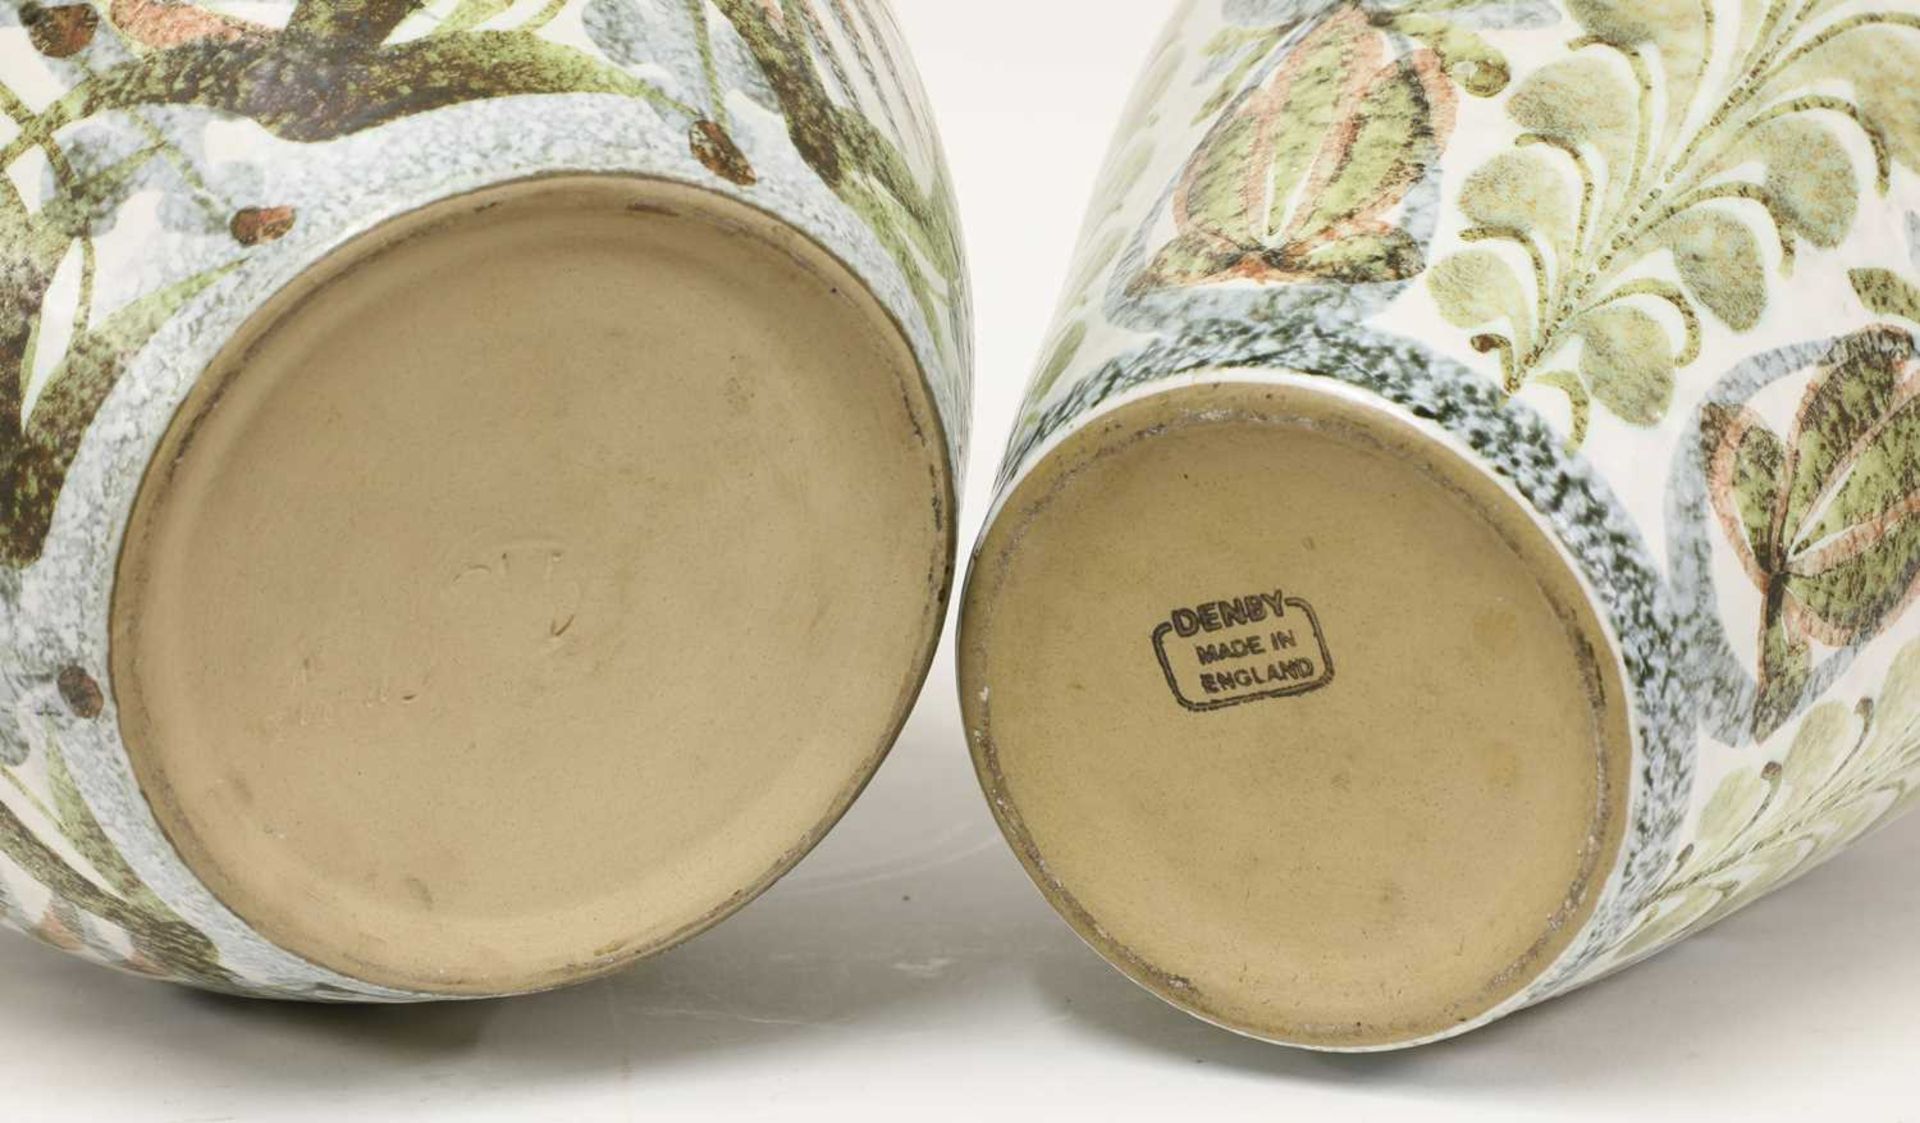 Two Denby stoneware vases, - Image 2 of 2